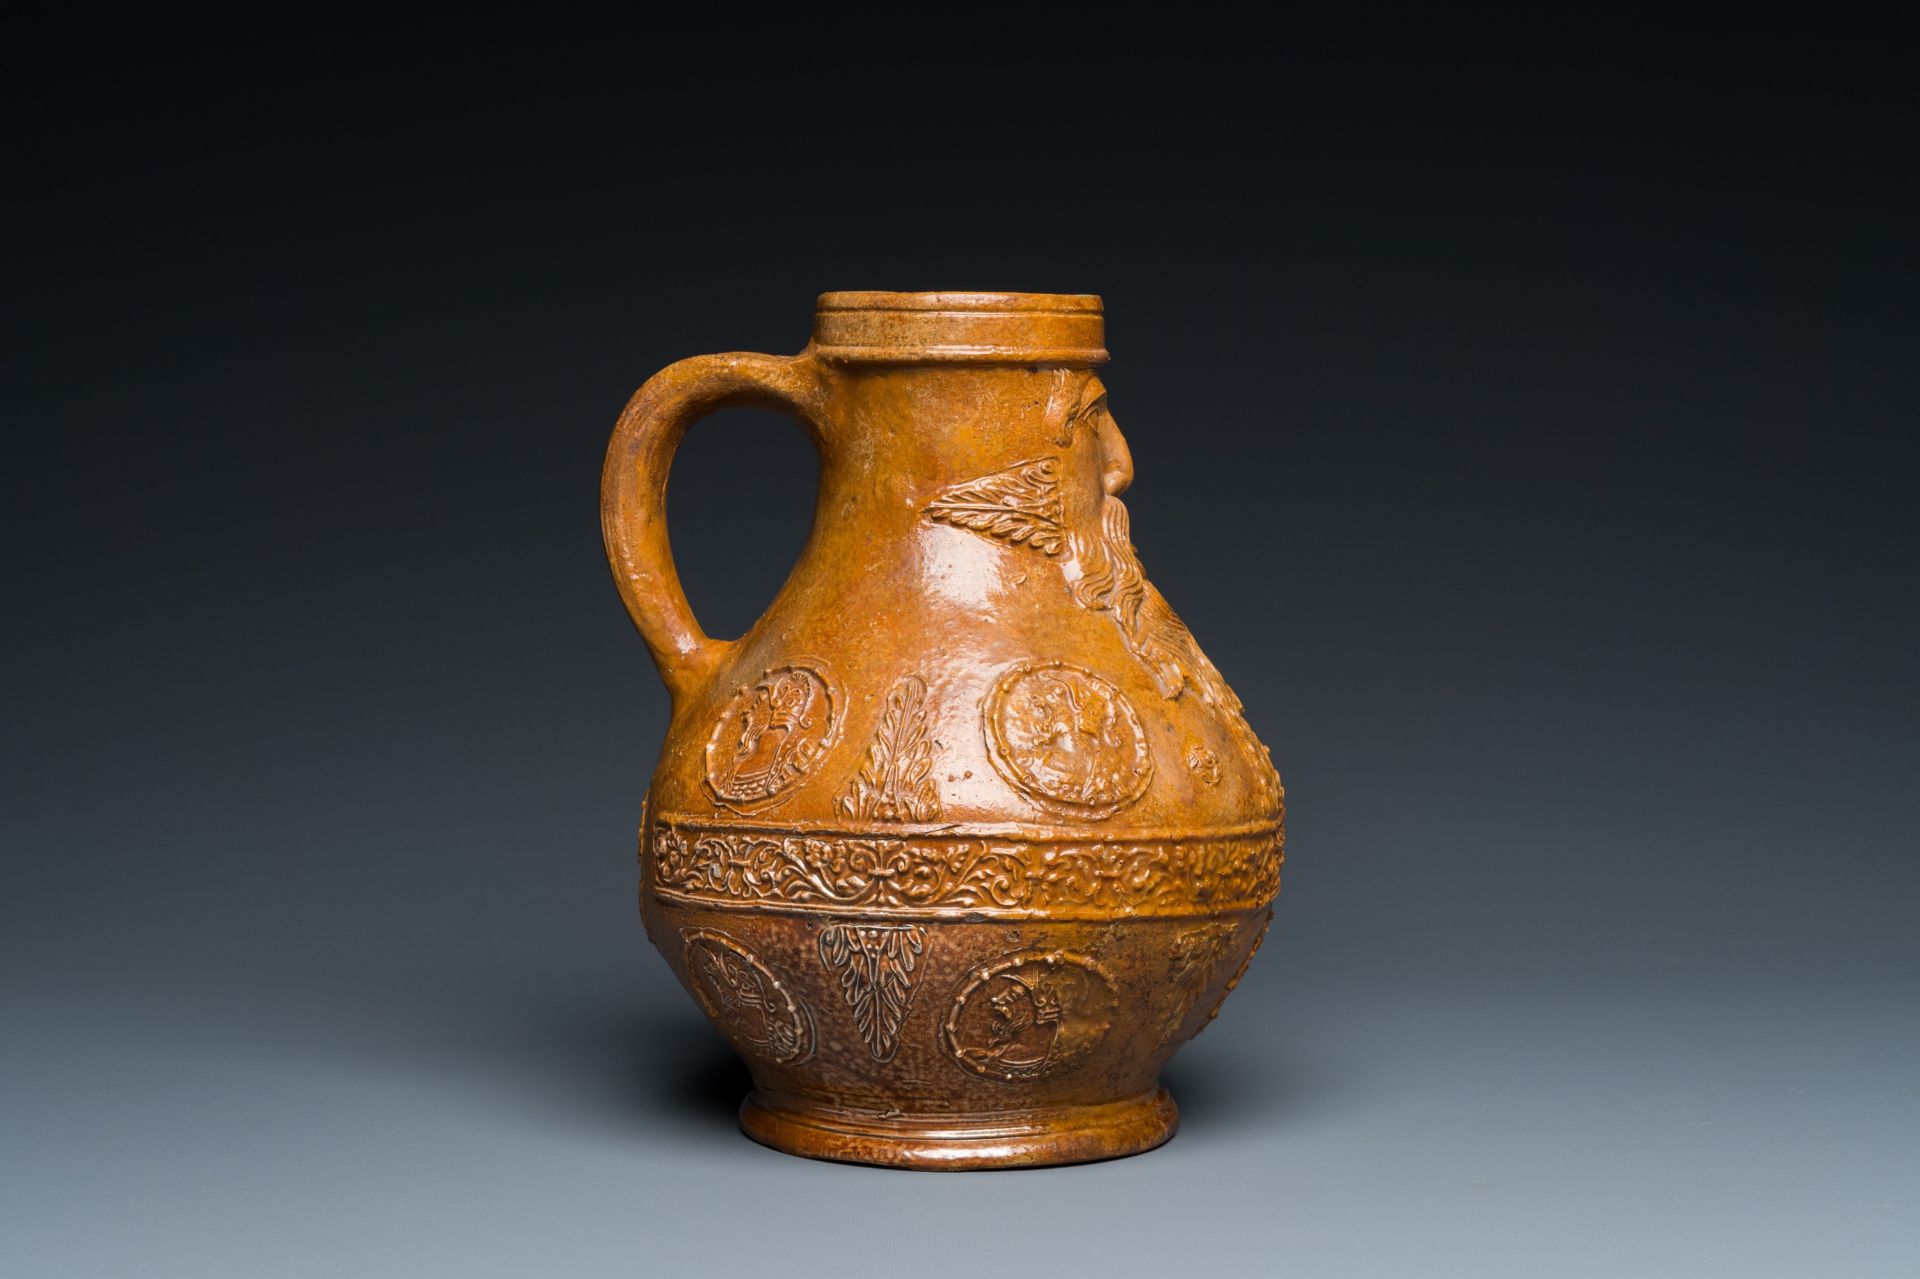 A rare German stoneware bellarmine jug with a bearded face sticking his tongue out, Cologne, 16th C. - Image 6 of 10